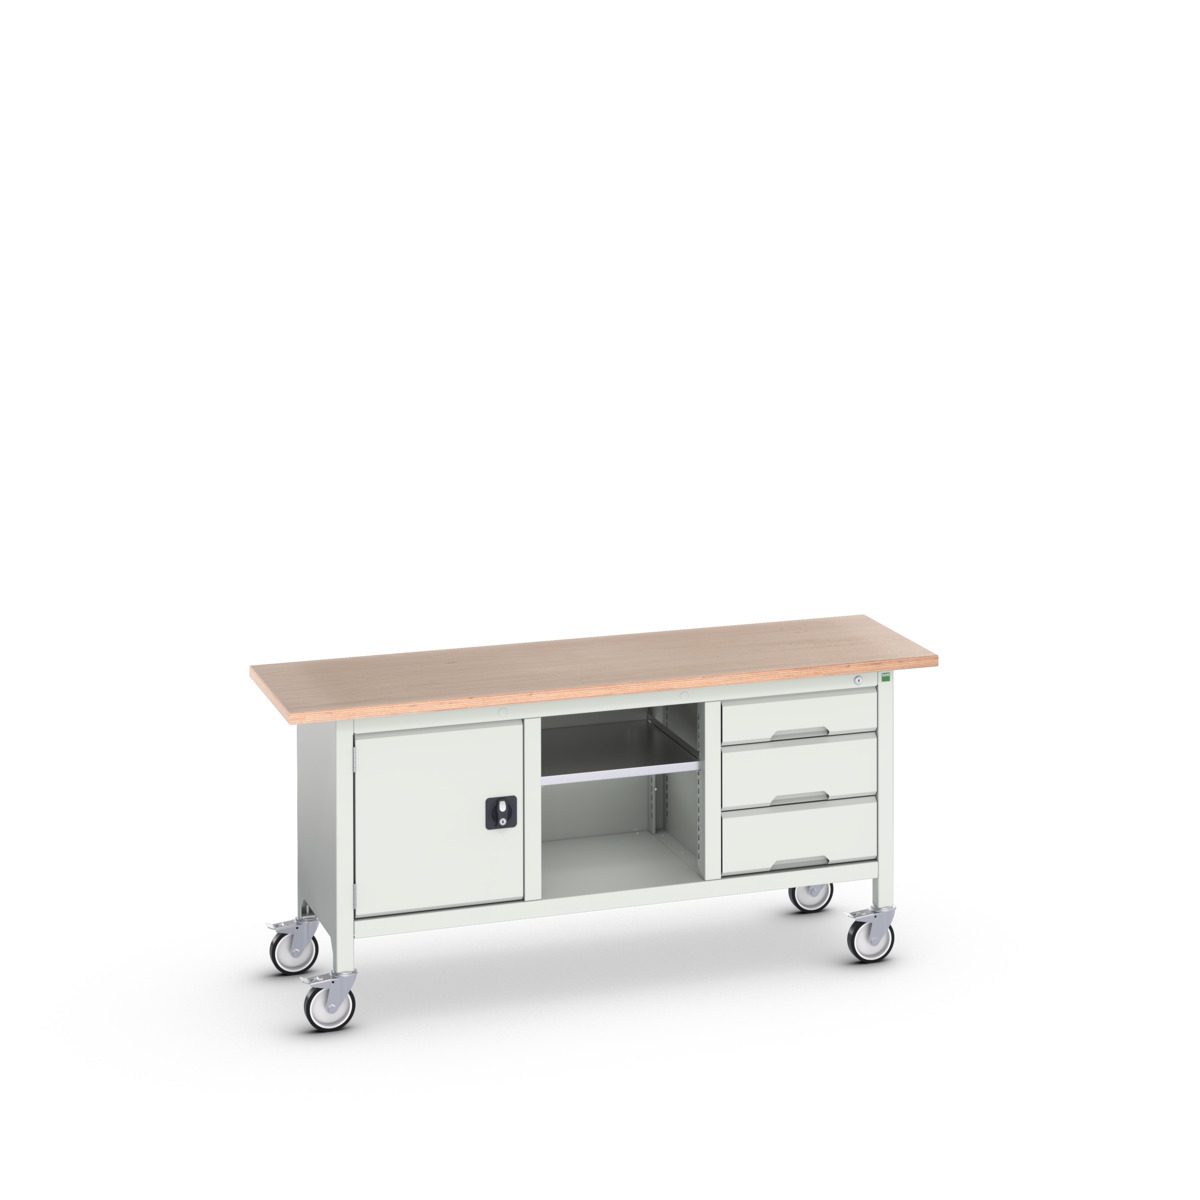 16923220.16 - verso mobile storage bench (mpx)